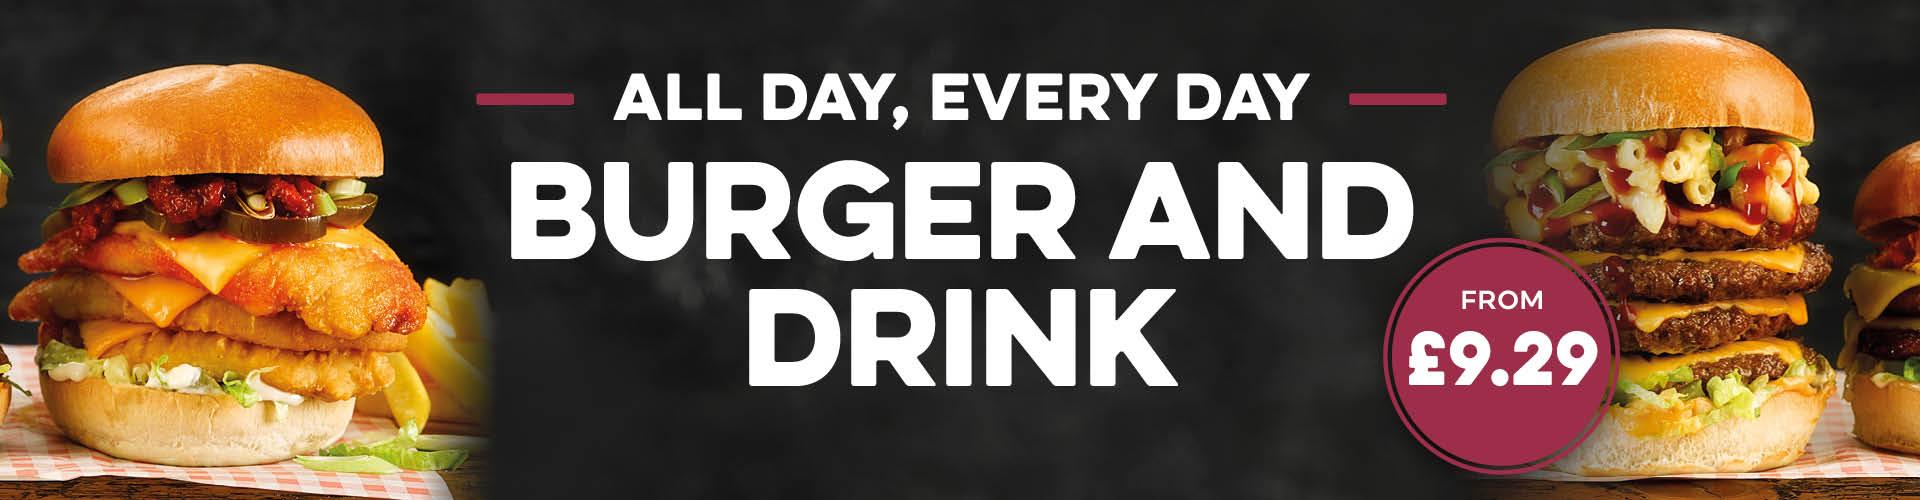 Enjoy a burger and a soft drink from just £9.29